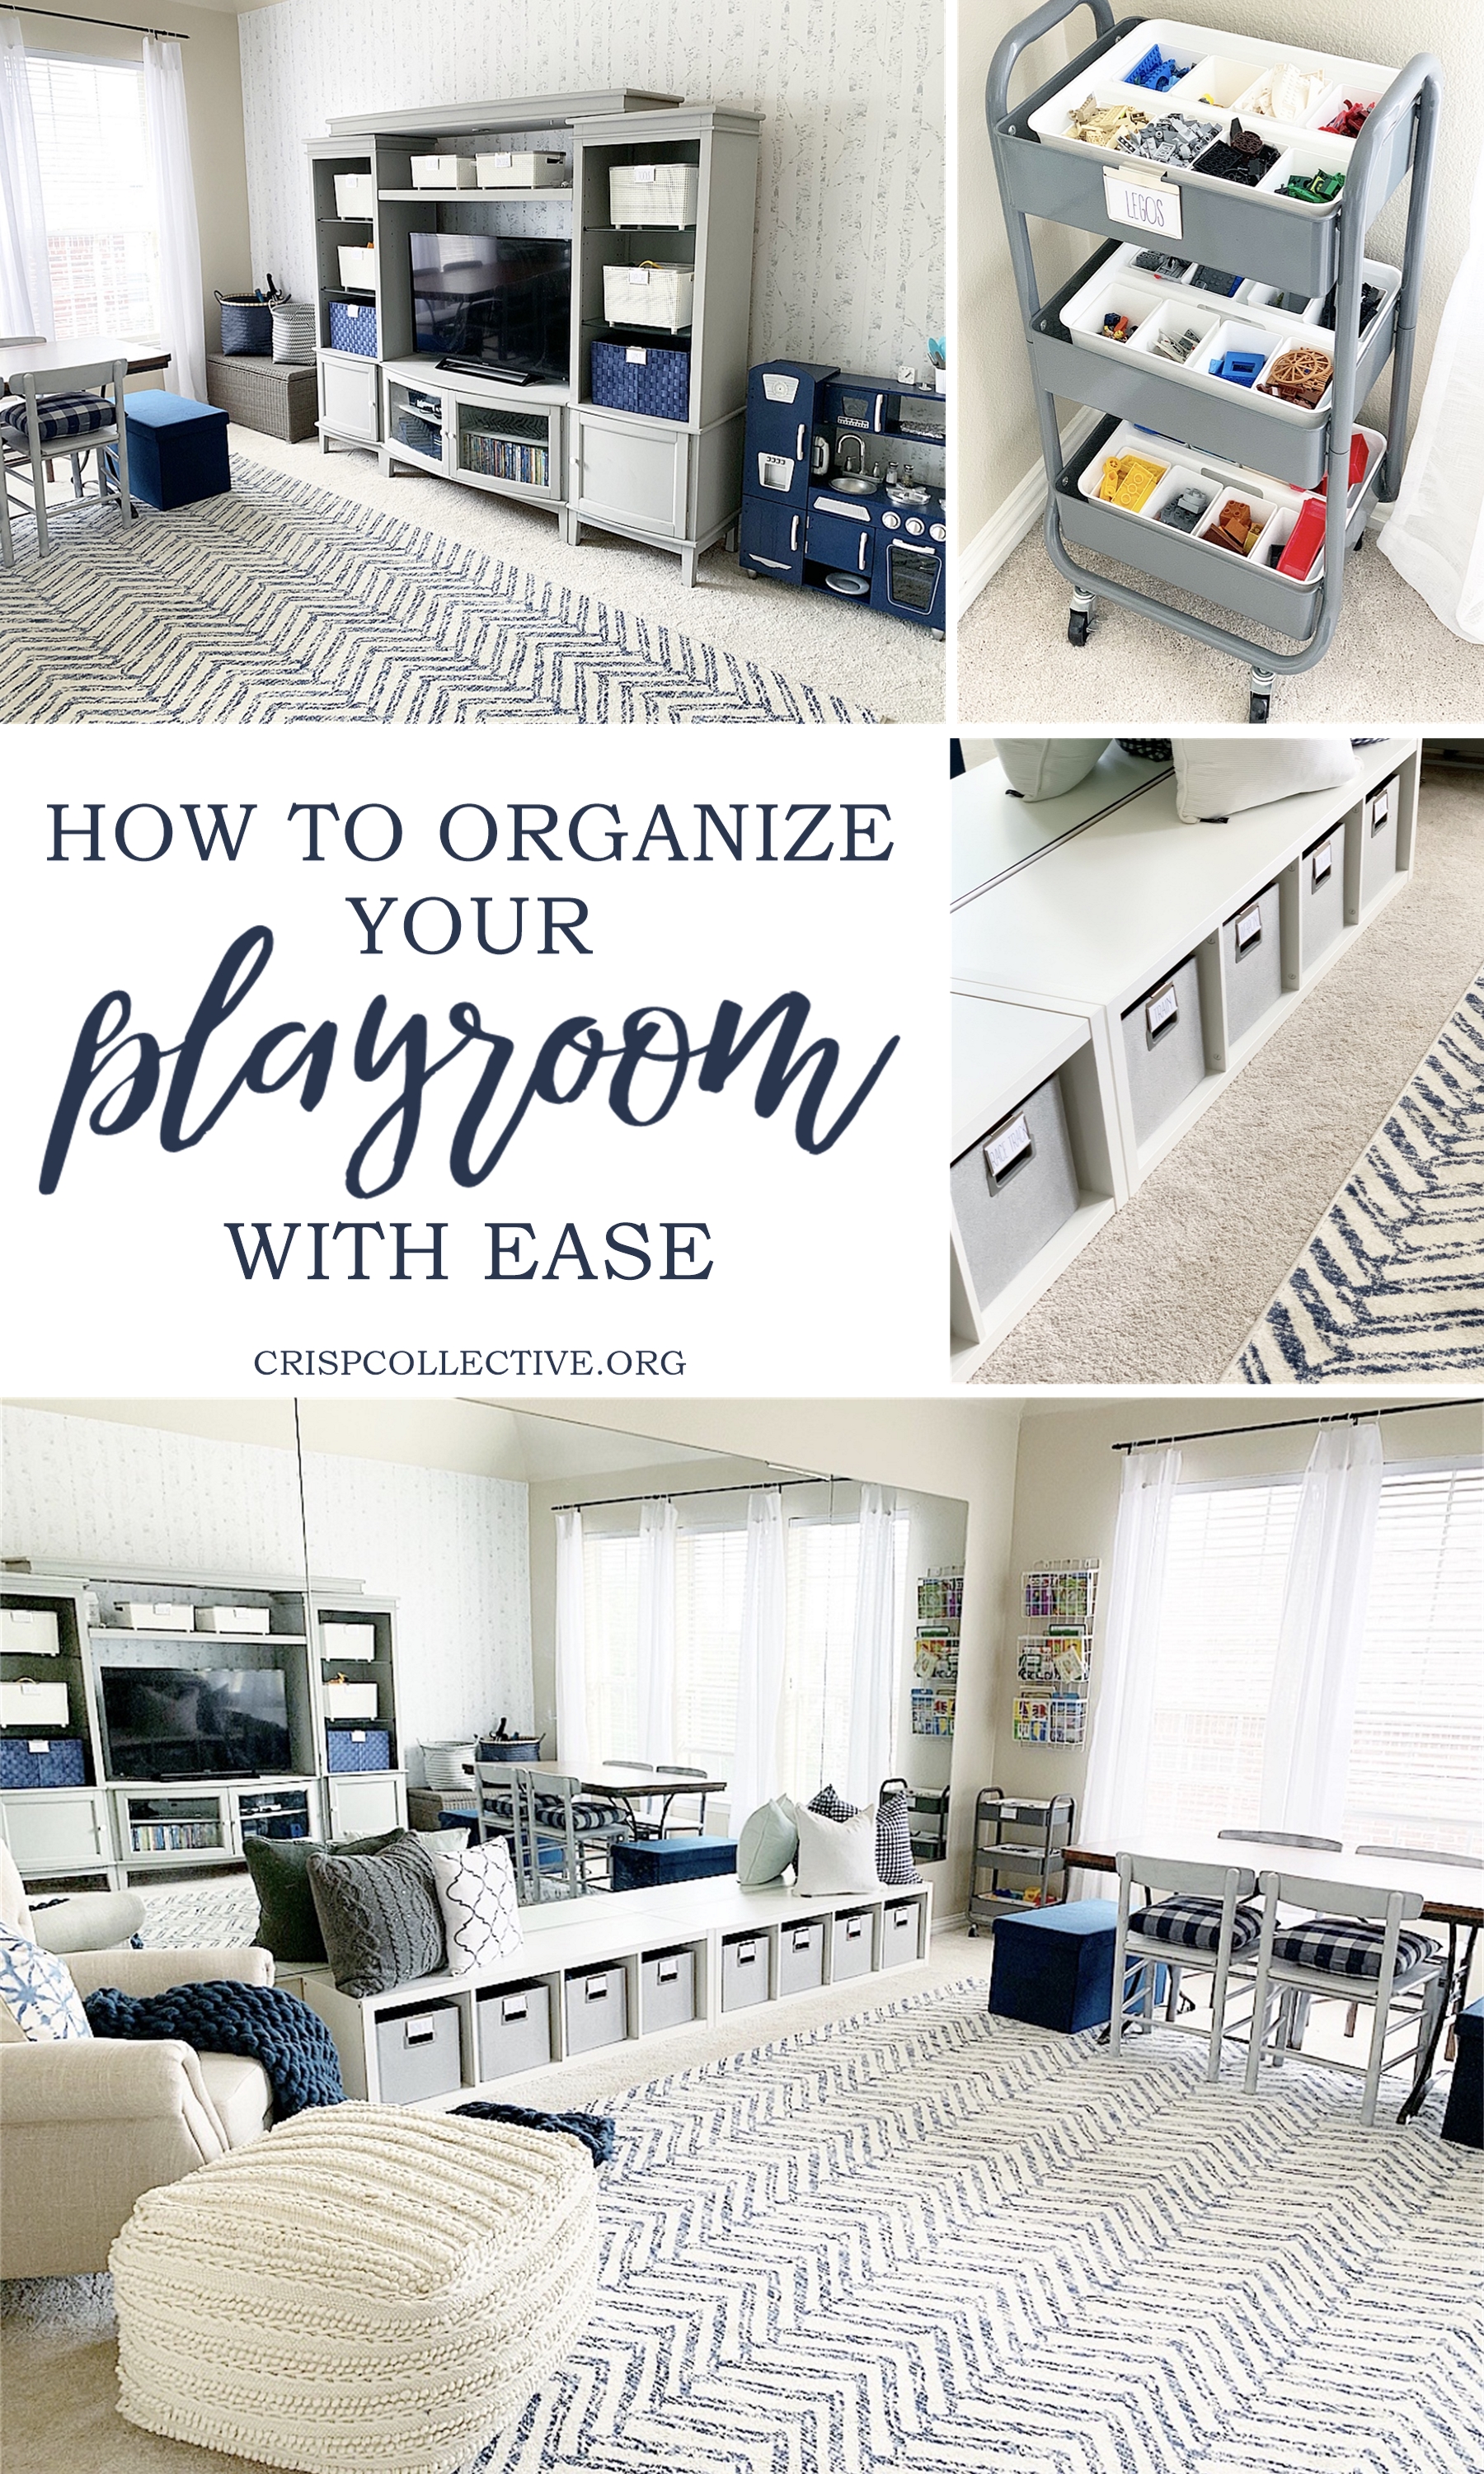 http://crispcollective.org/wp-content/uploads/2019/02/How-to-organize-a-playroom-with-ease.jpg